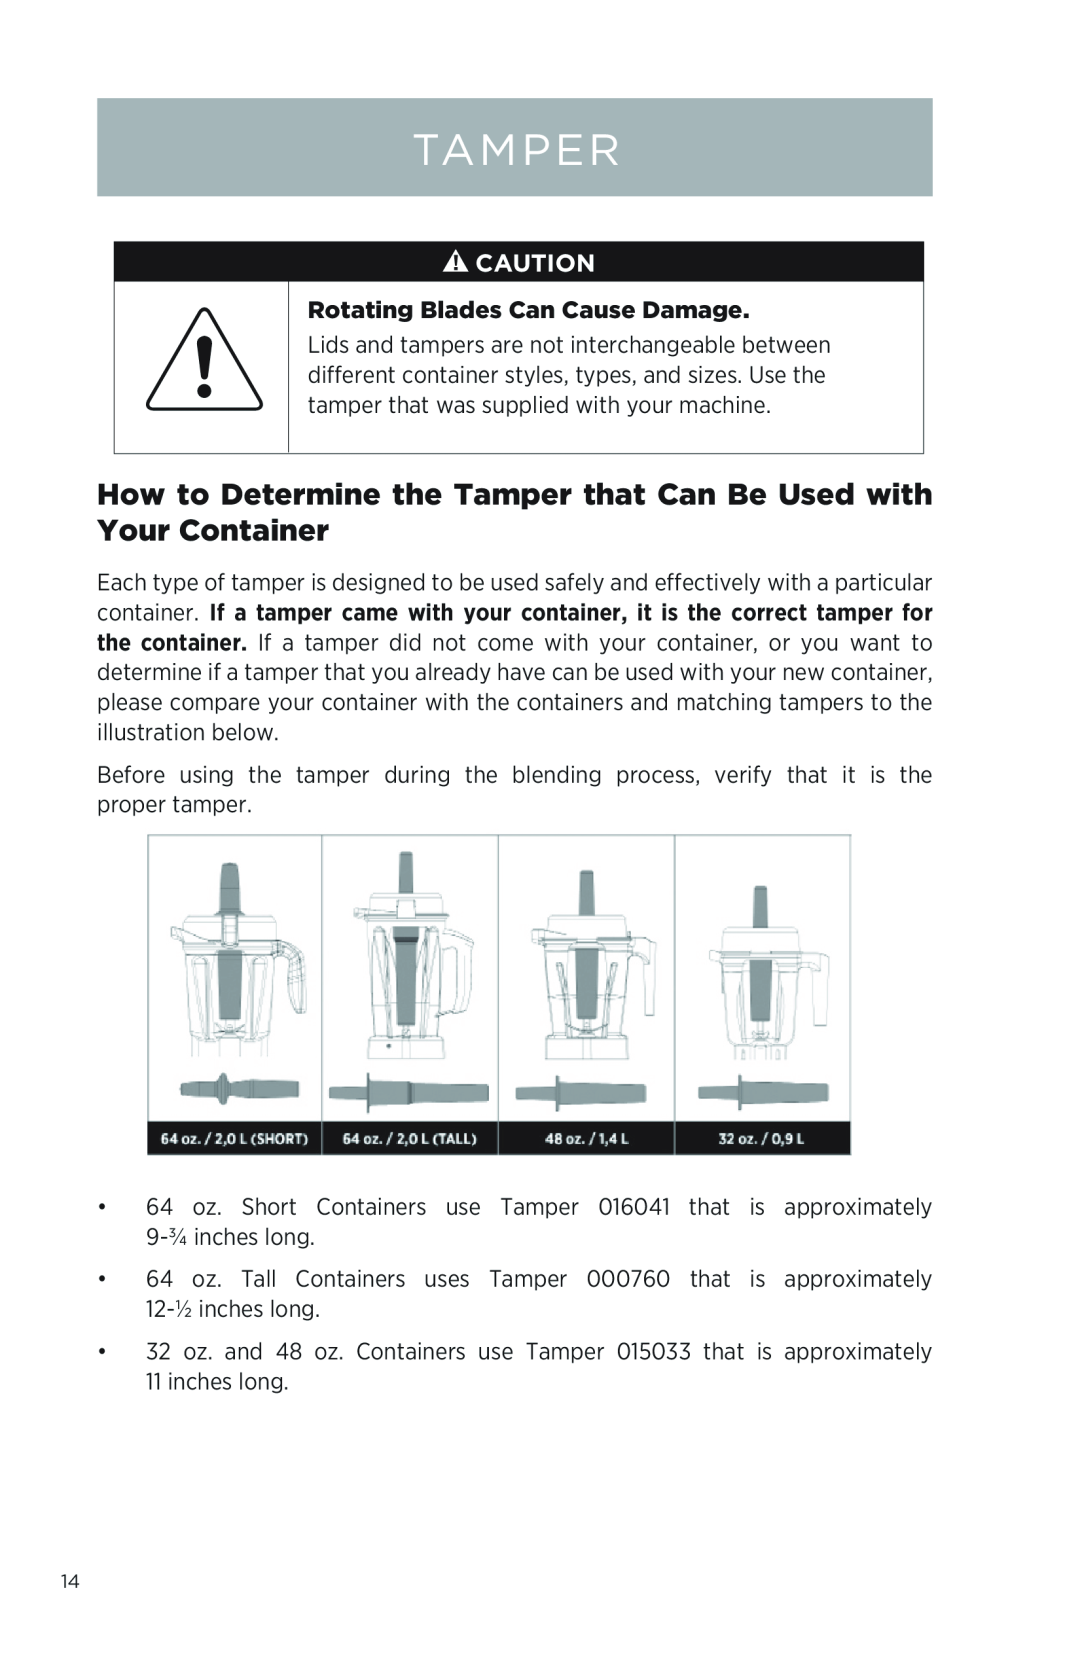 Vita-Mix NA How to Determine the Tamper that Can Be Used with Your Container, Rotating Blades Can Cause Damage 